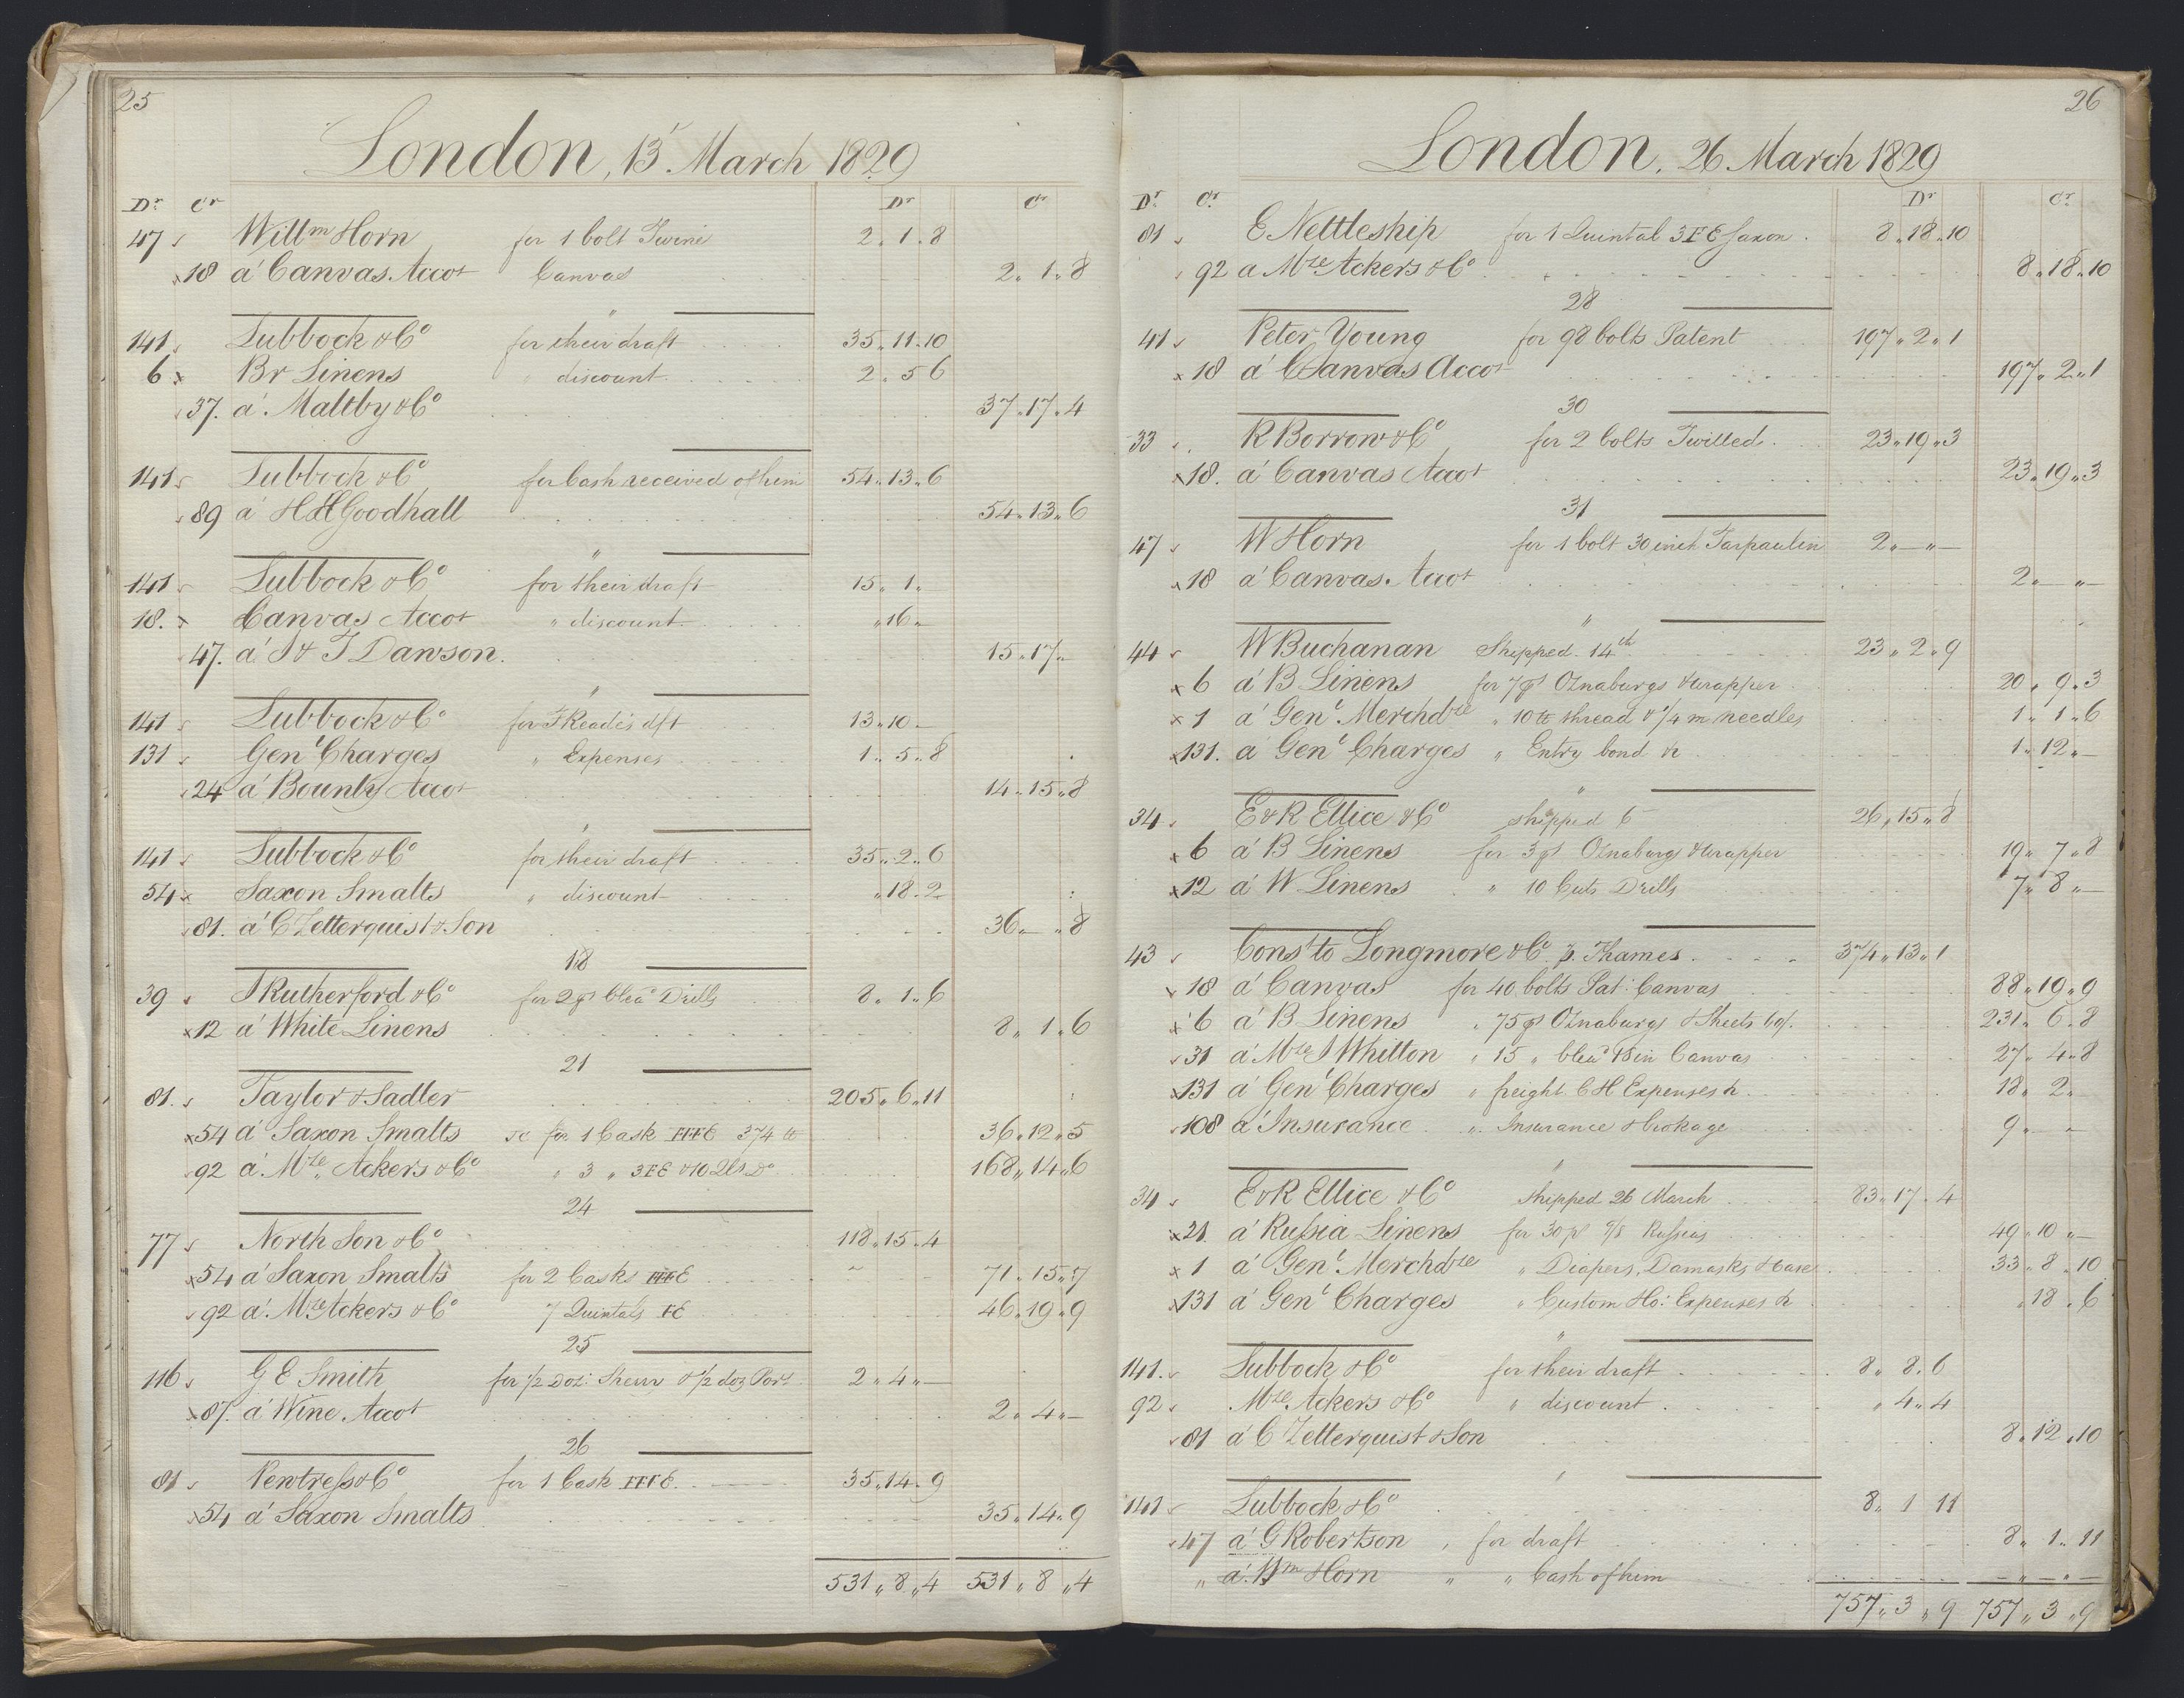 Smith, Goodhall & Reeves, RA/PA-0586/R/L0001: Dagbok (Daybook) A, 1829-1831, s. 25-26